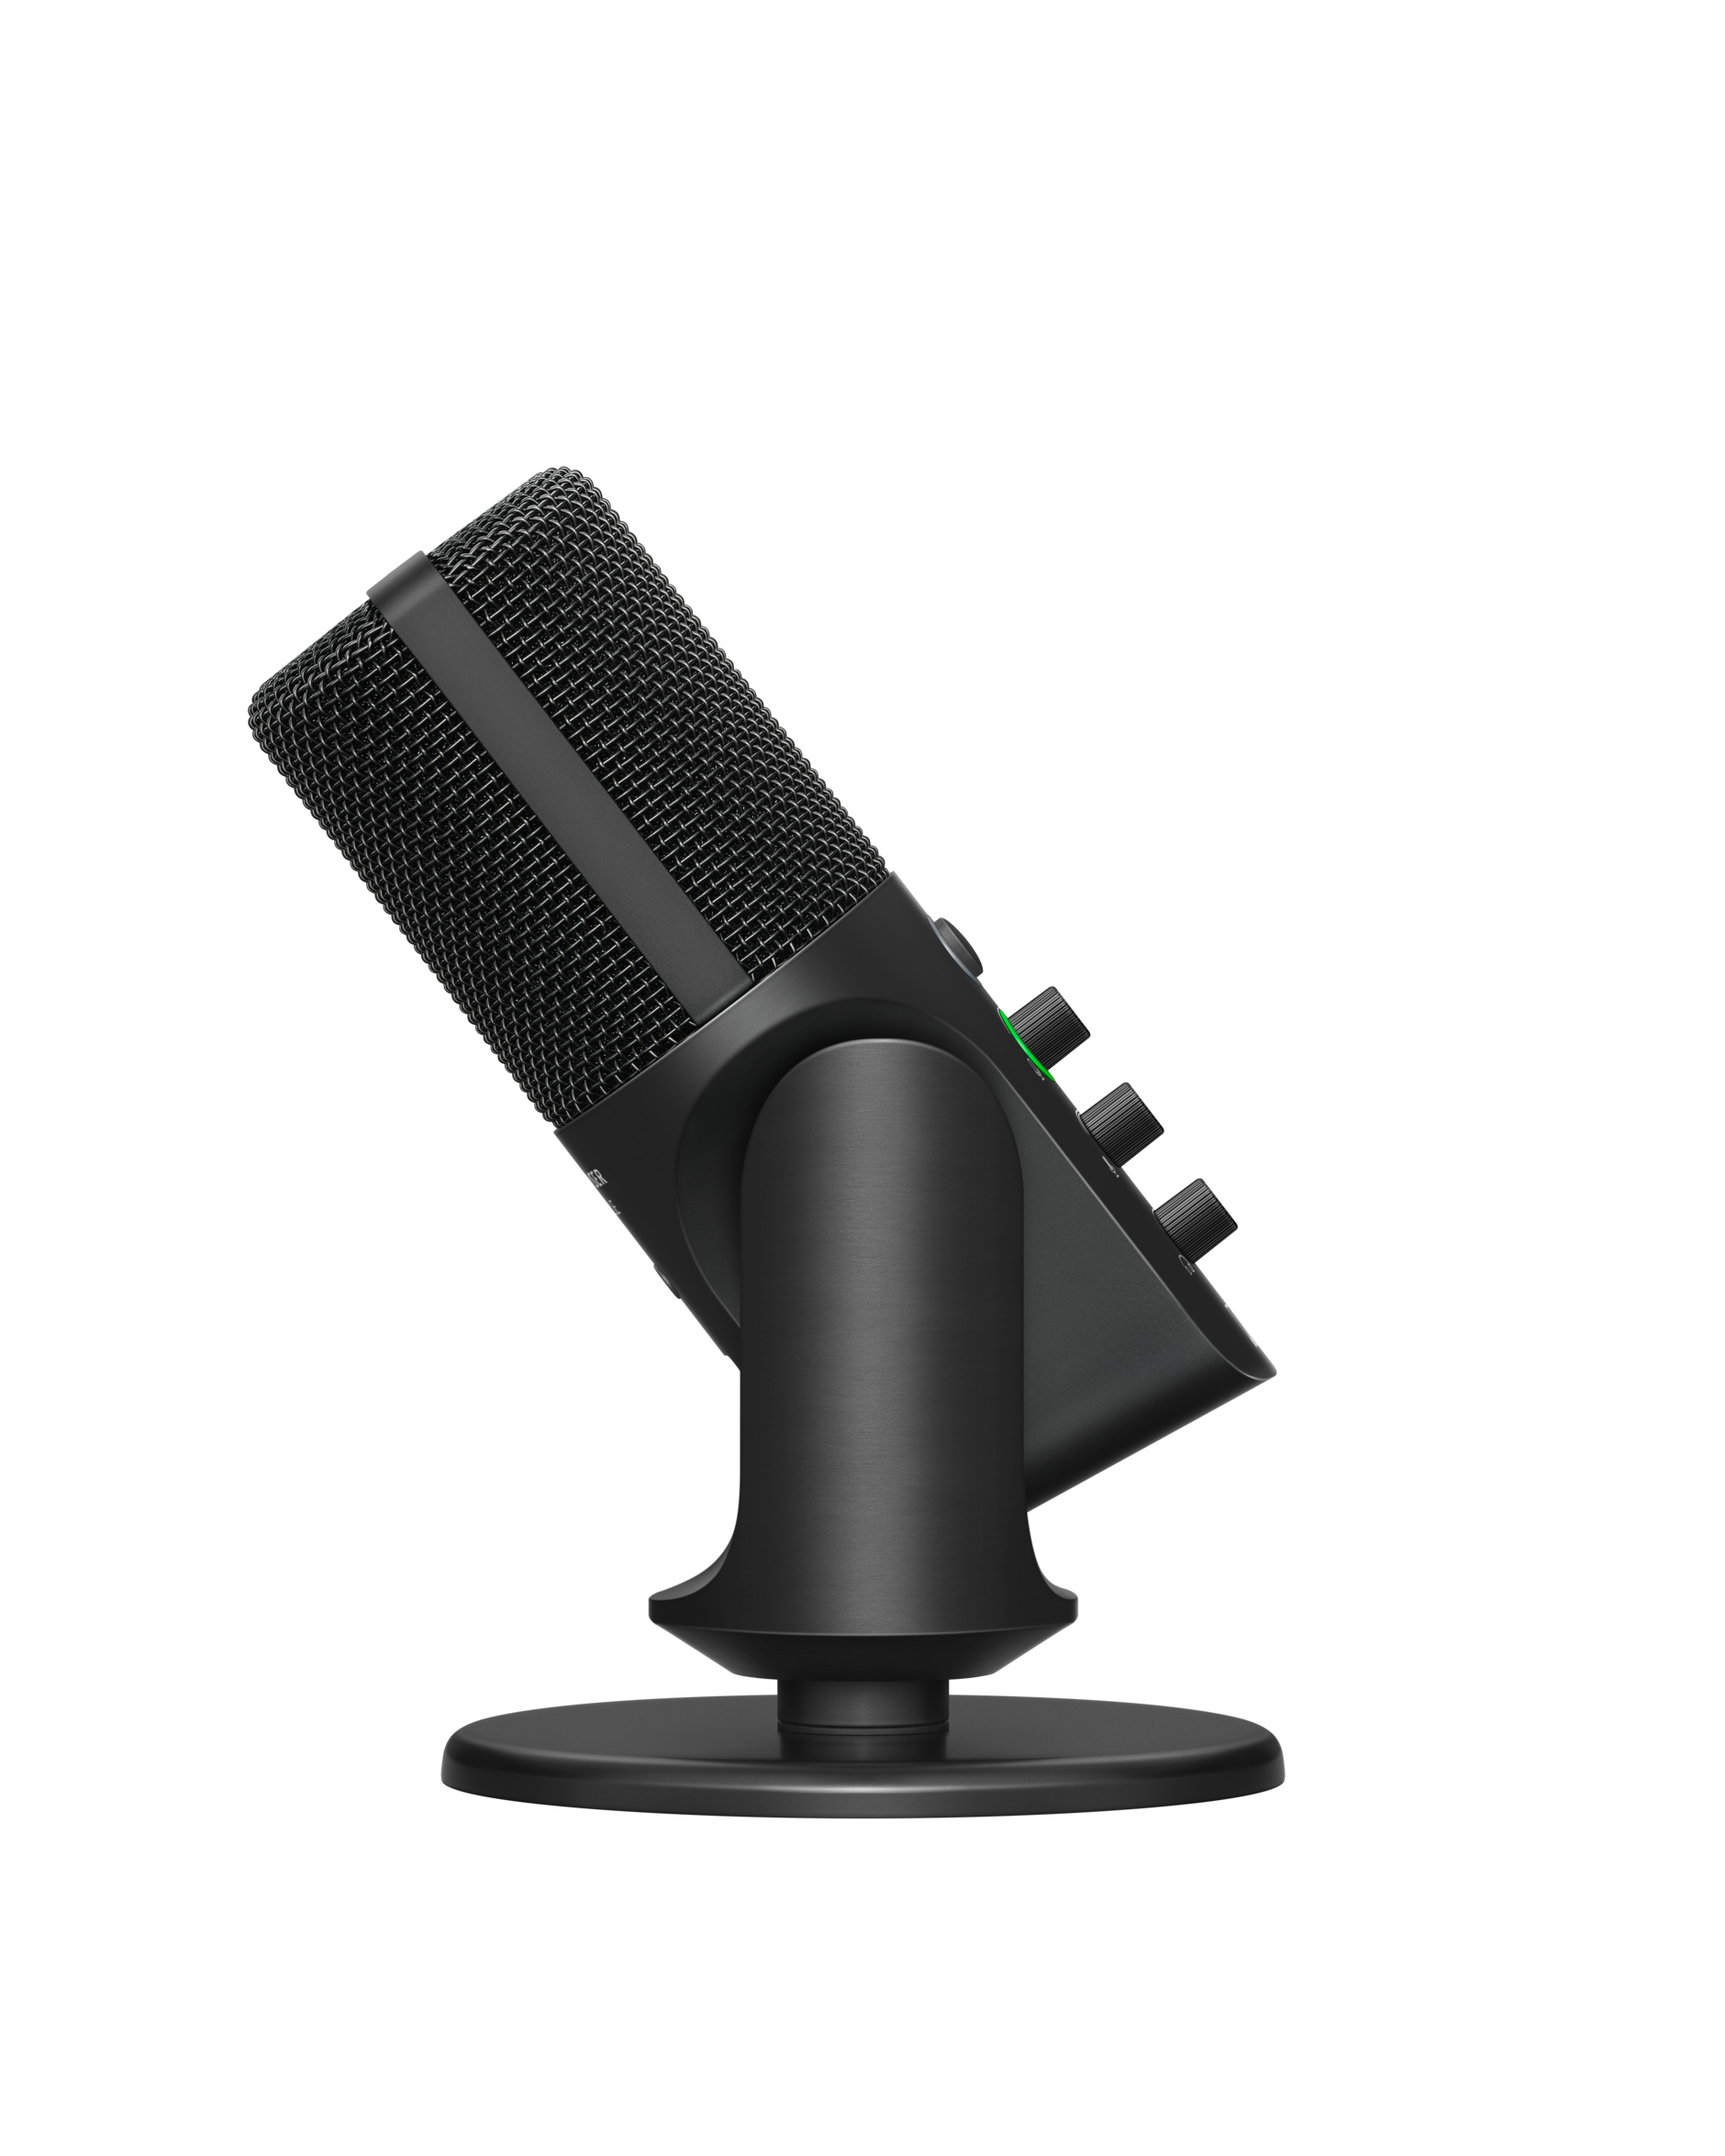 Profile_USB_Microphone_product_shots_side_45-degree_with_base